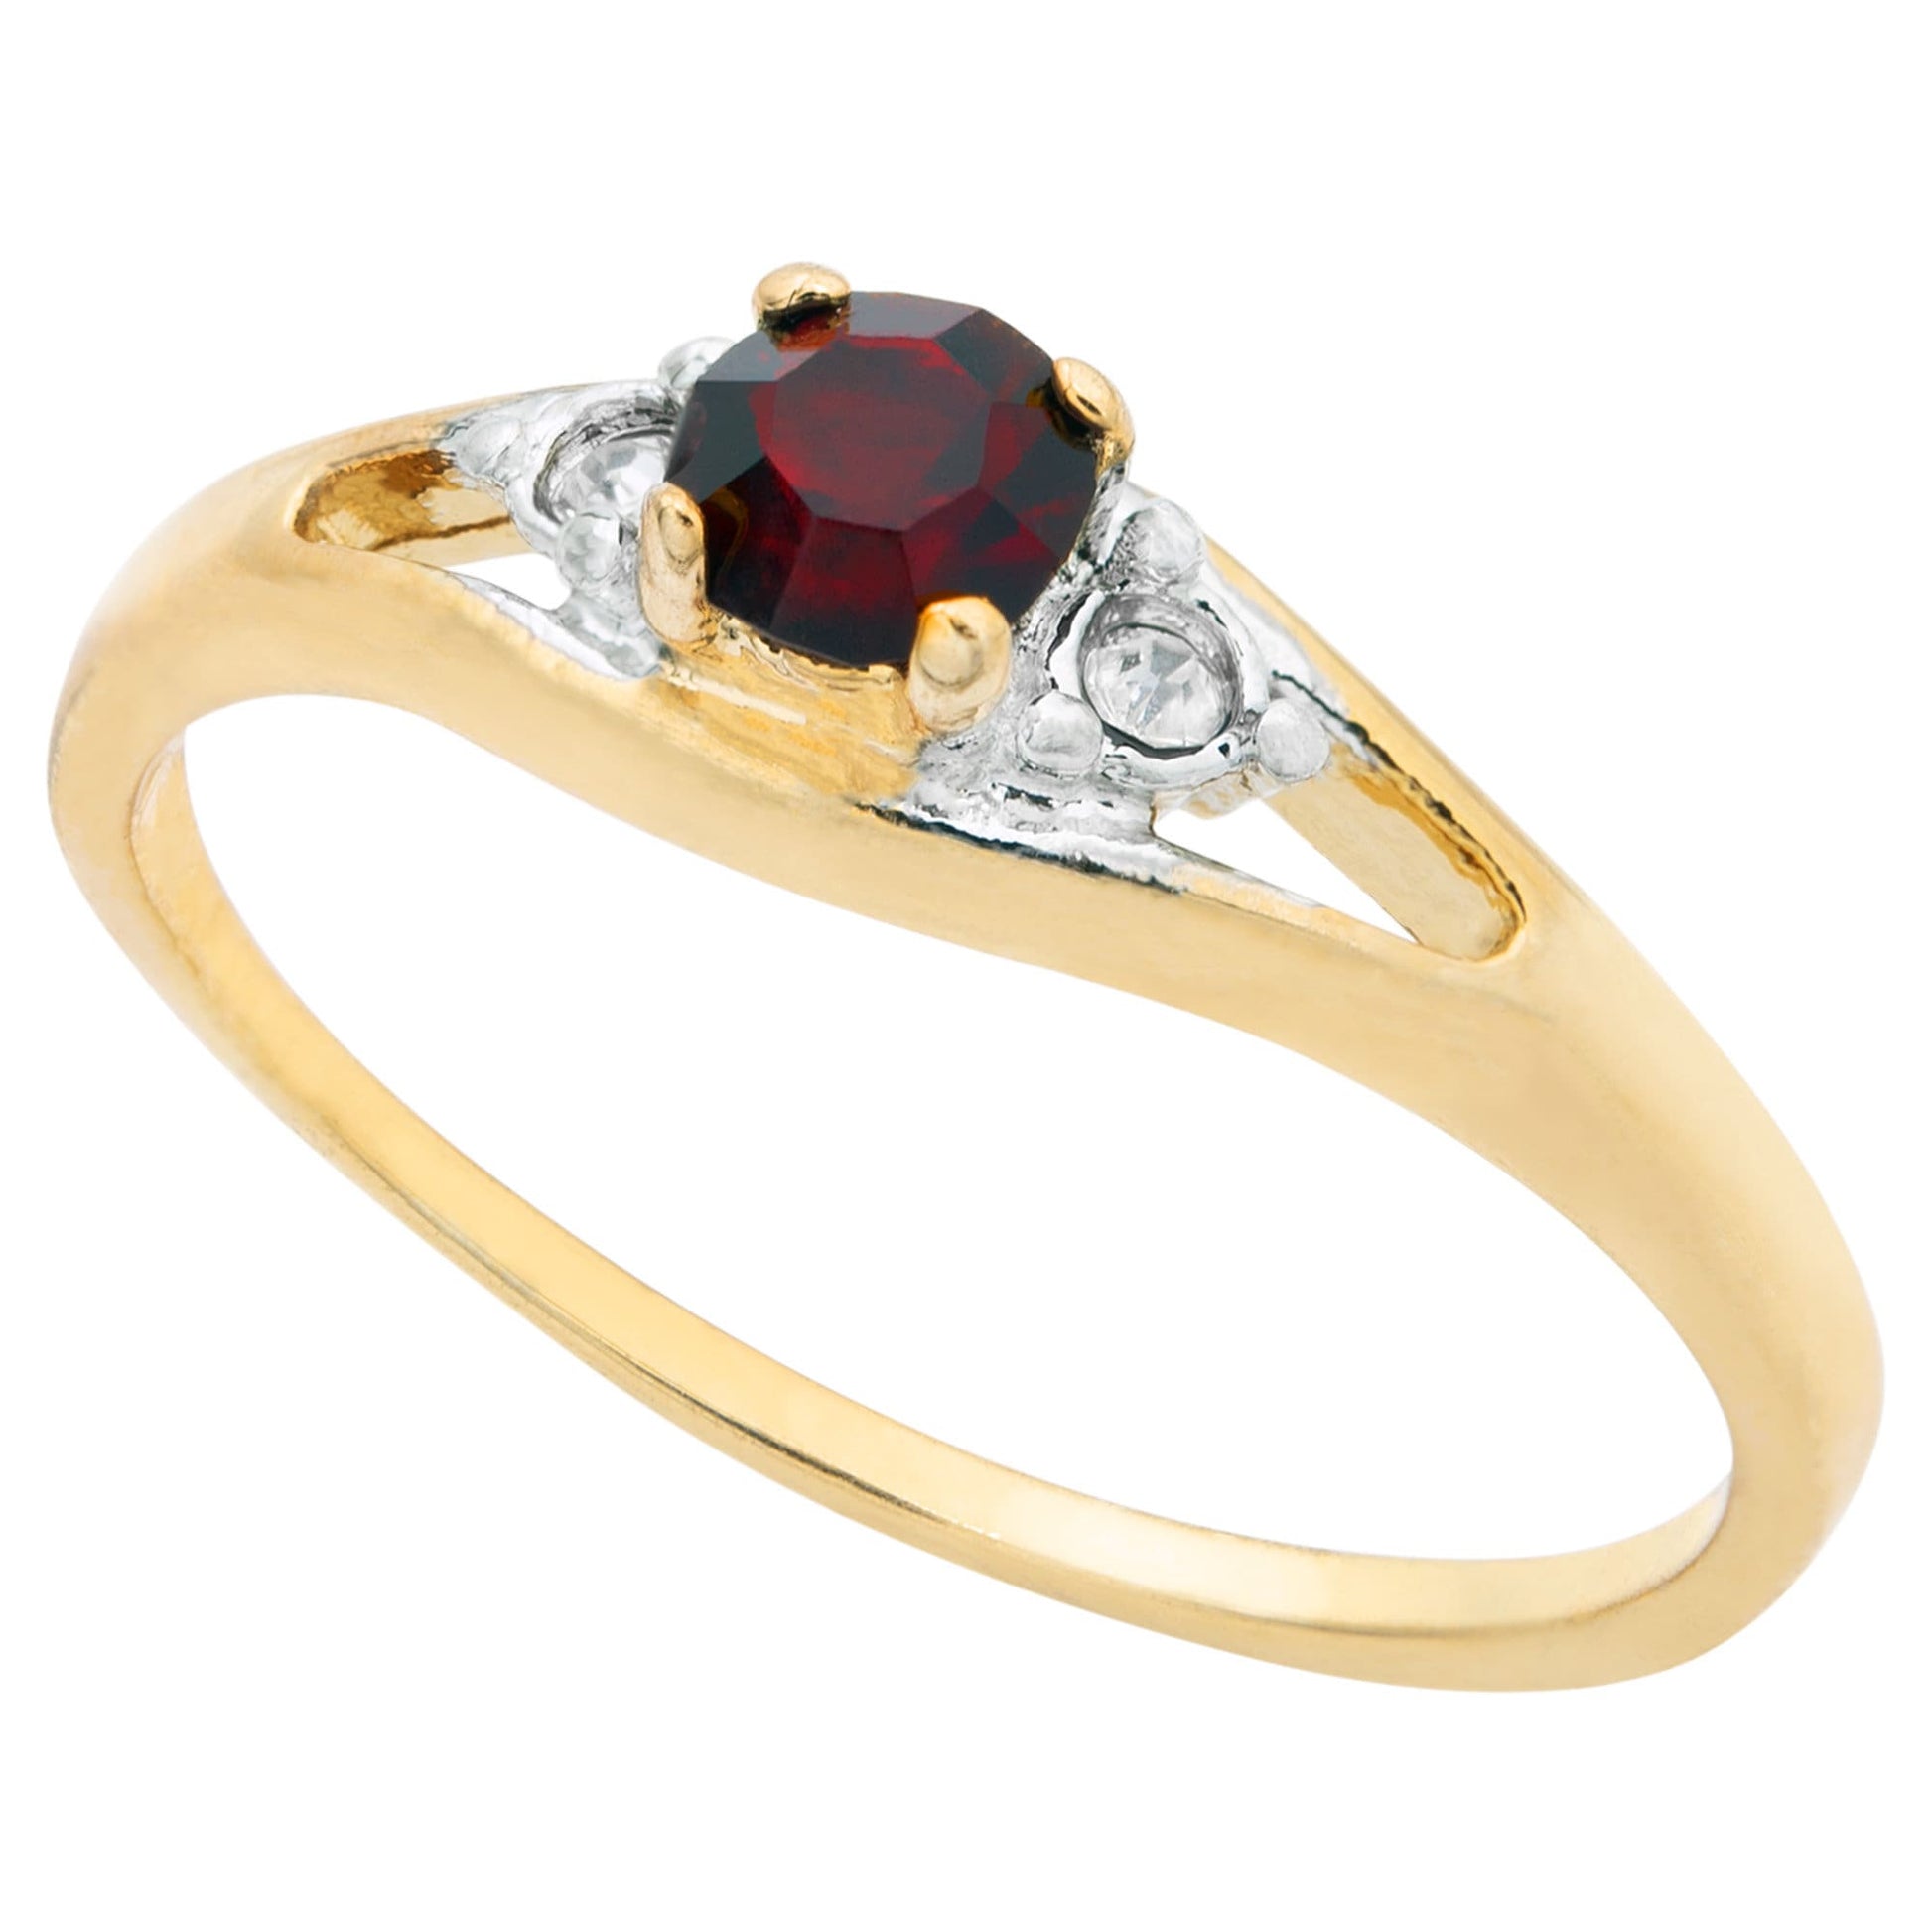 Vintage Garnet with Clear Austrian Crystal Accents 18k Gold Womans Antique Rings R2891 - Limited Stock - Never Worn